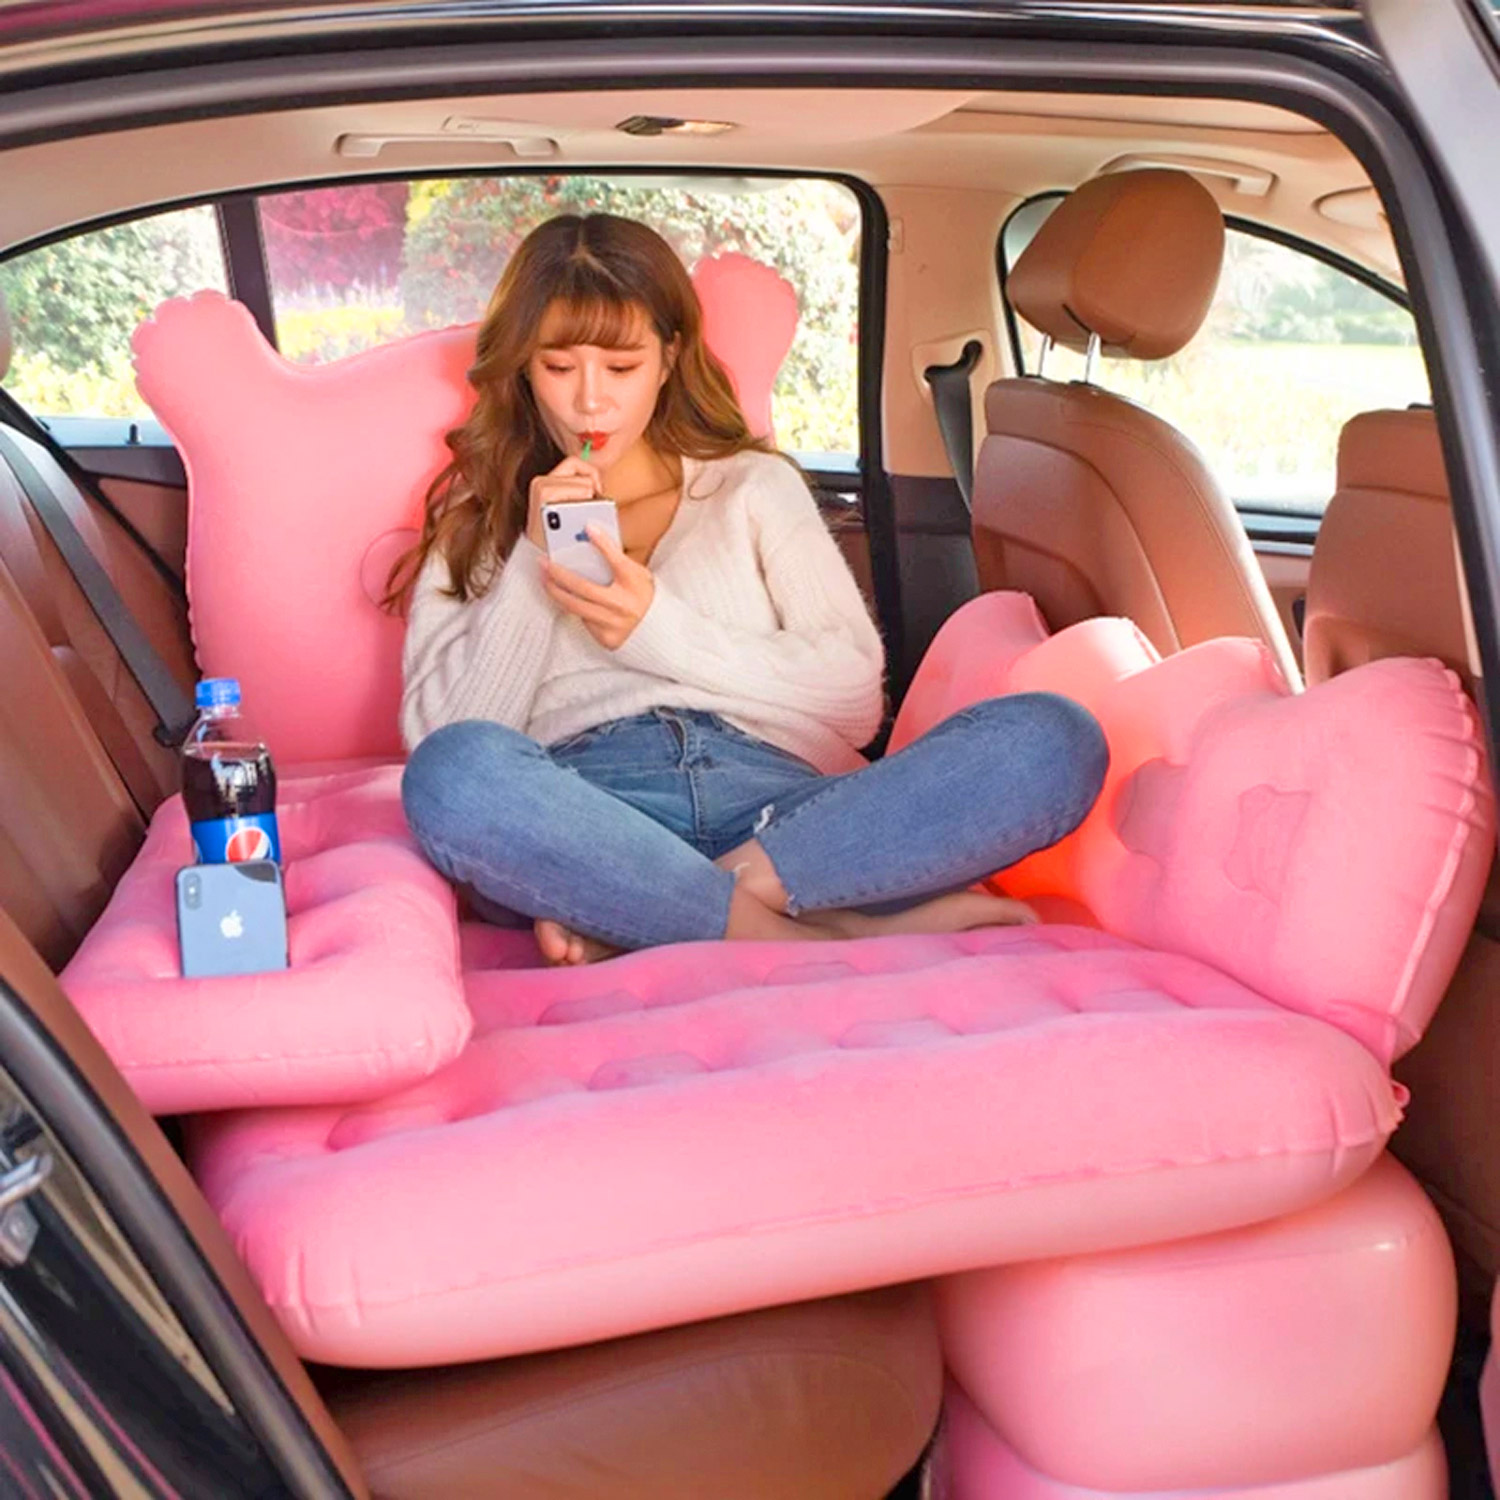 this inflatable backseat lounger and bed for the car is perfect for long road trips og